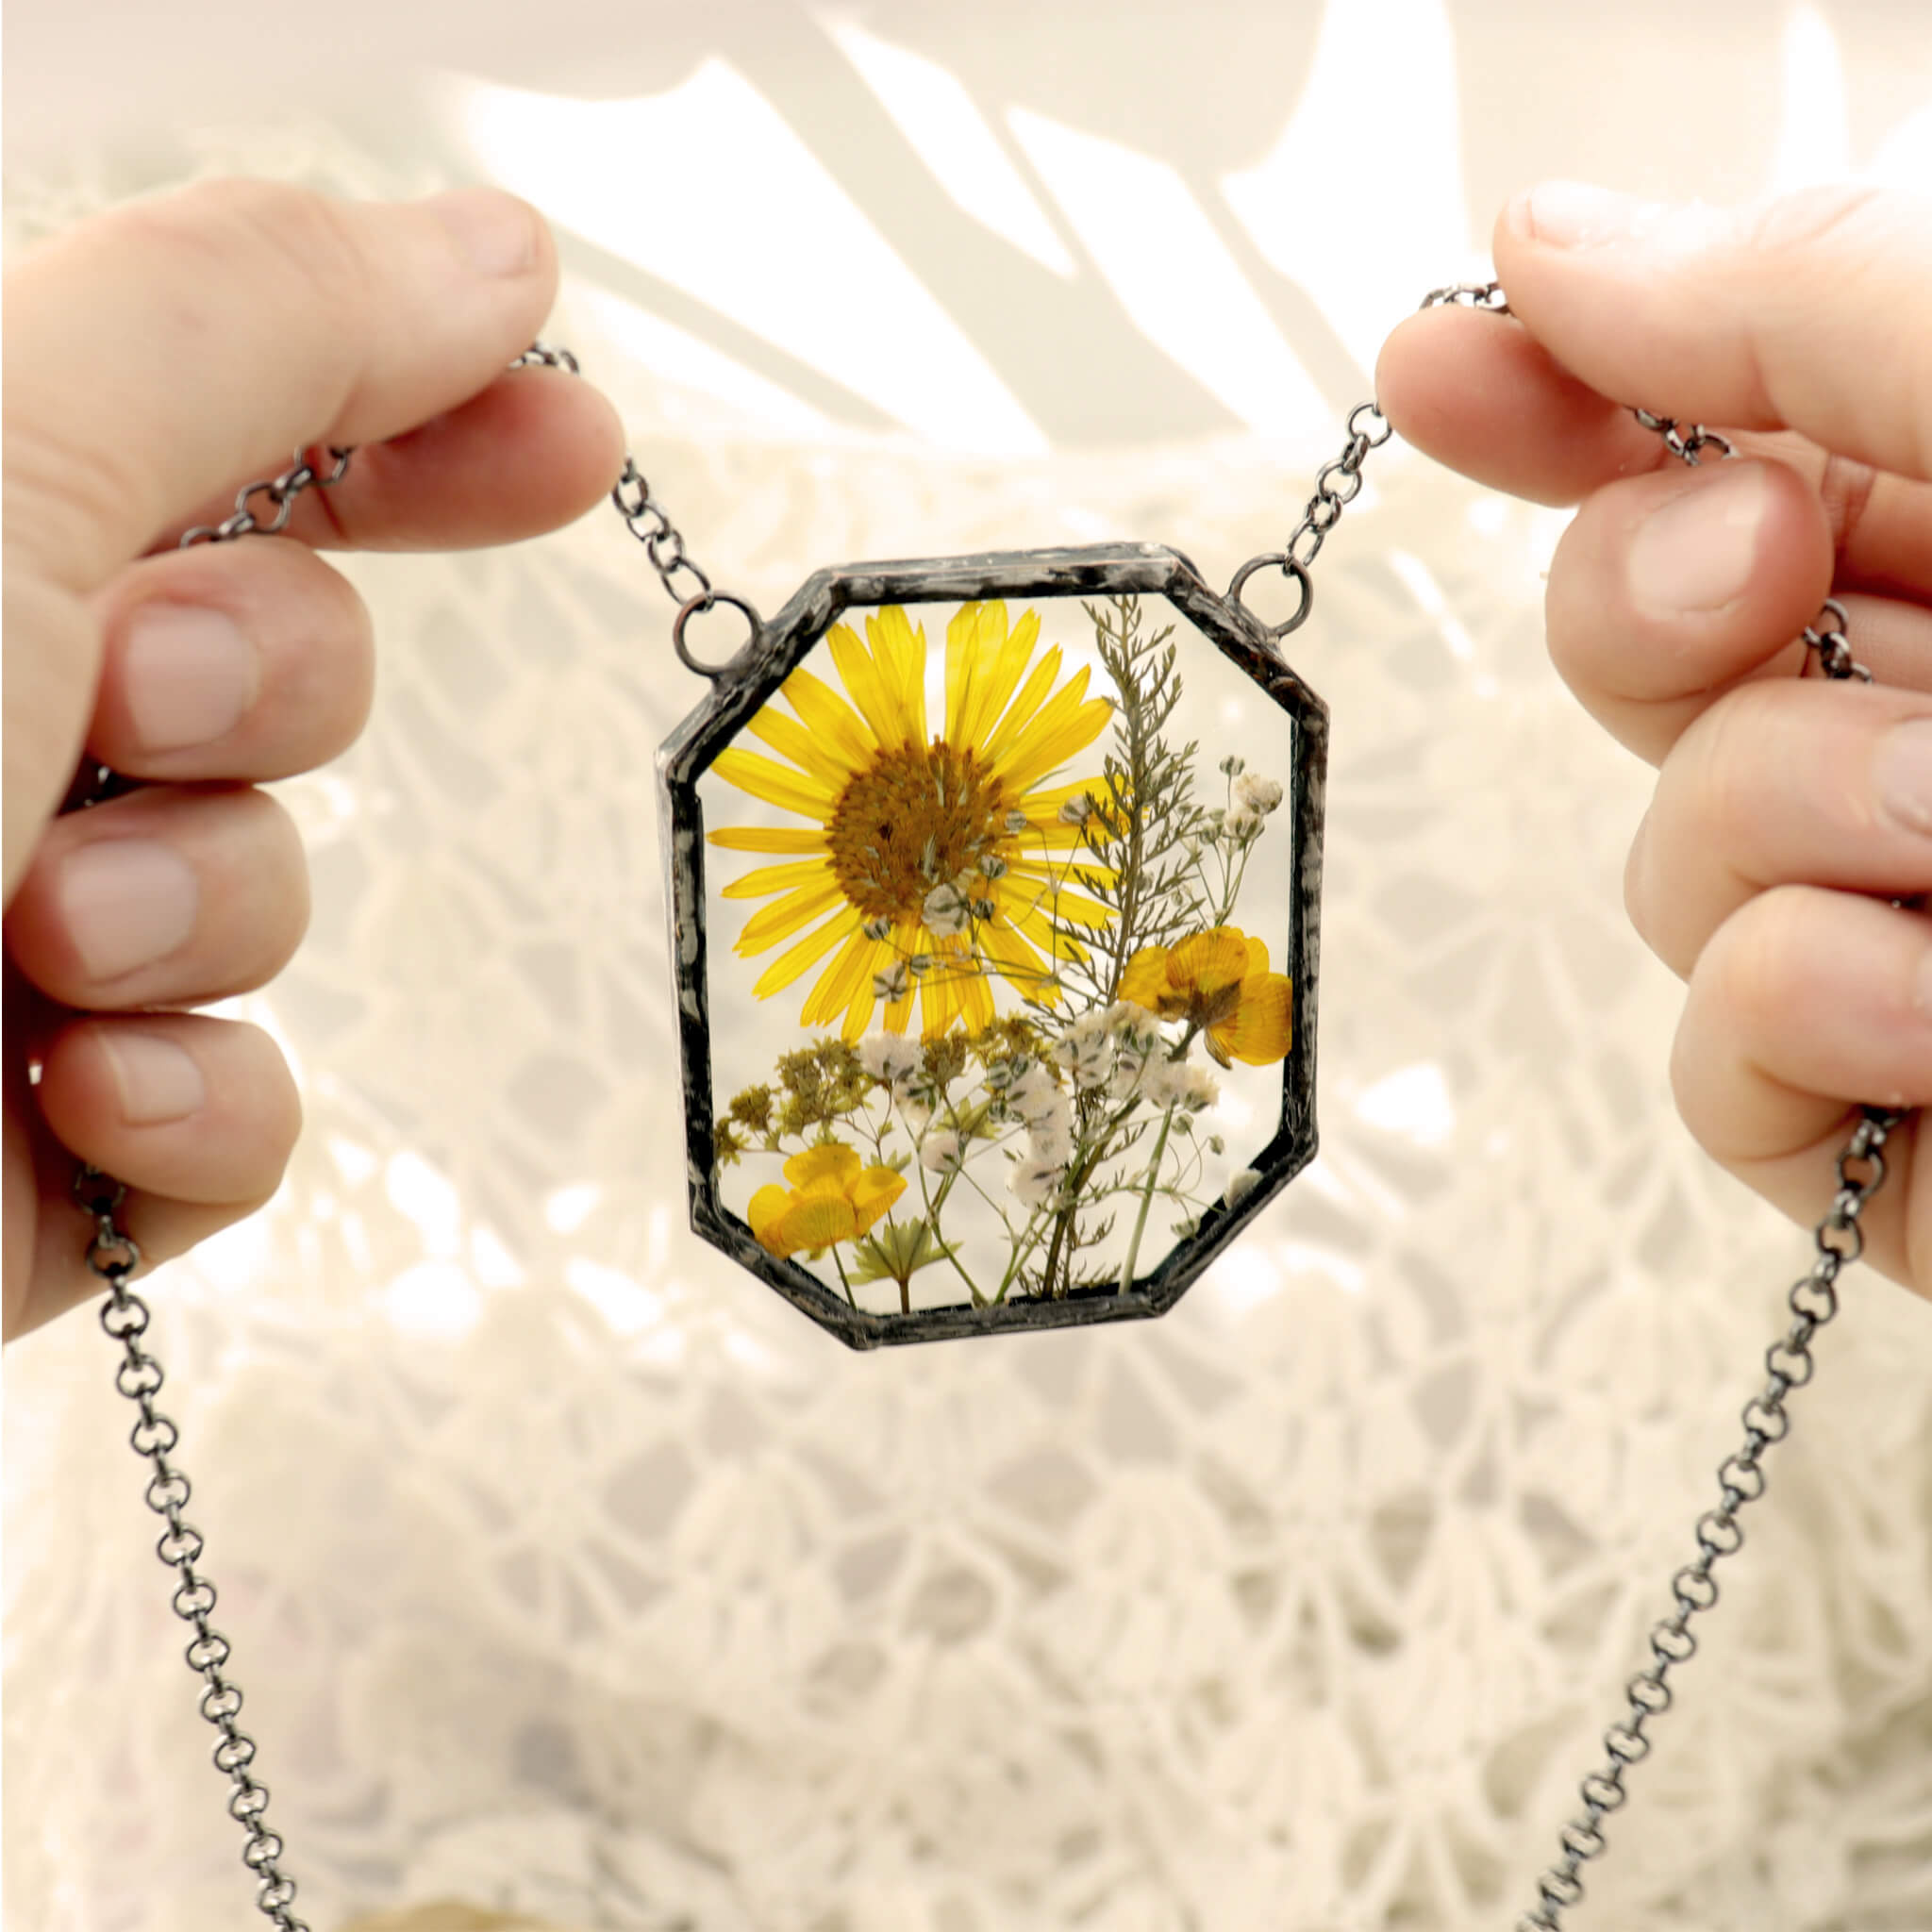 on a white background hands holding chain of a yellow flowers glass necklace